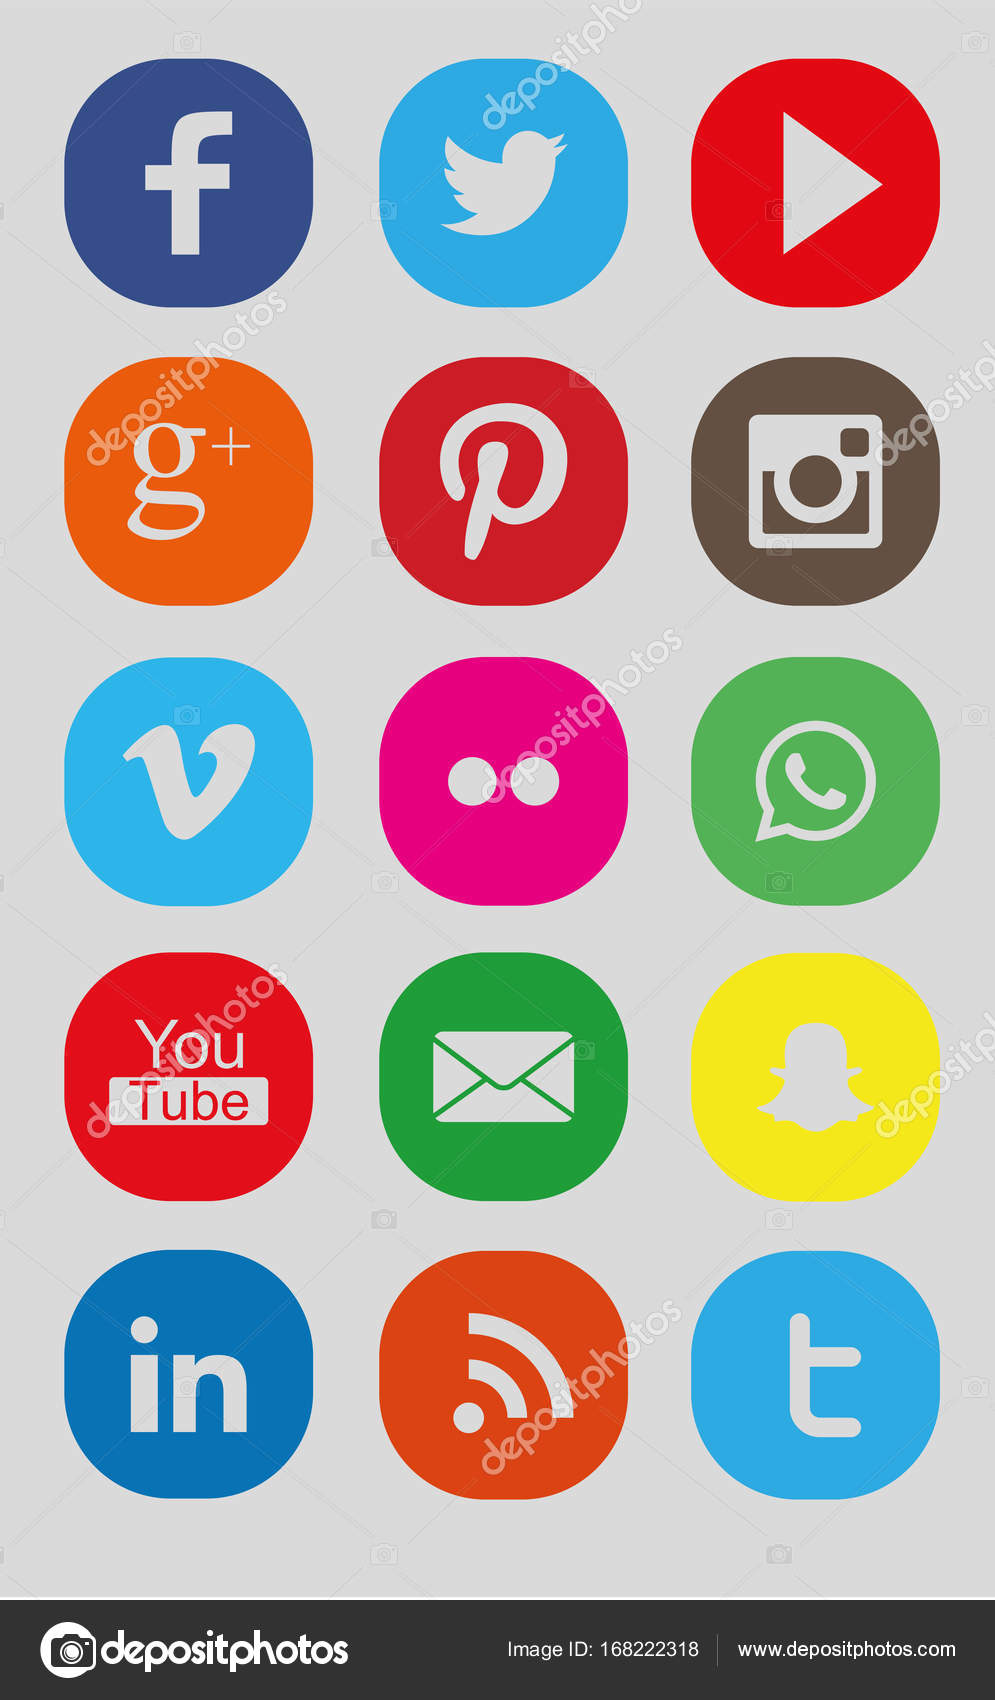 Big Collection Of Round Square Color Icons Like Facebook Twitter Youtube Google Plus Pinterest Instagram Vimeo Flickr Whatsapp Snapchat Mail Linkedin Rss All Are Png Compatible With Alpha Vector Image By C